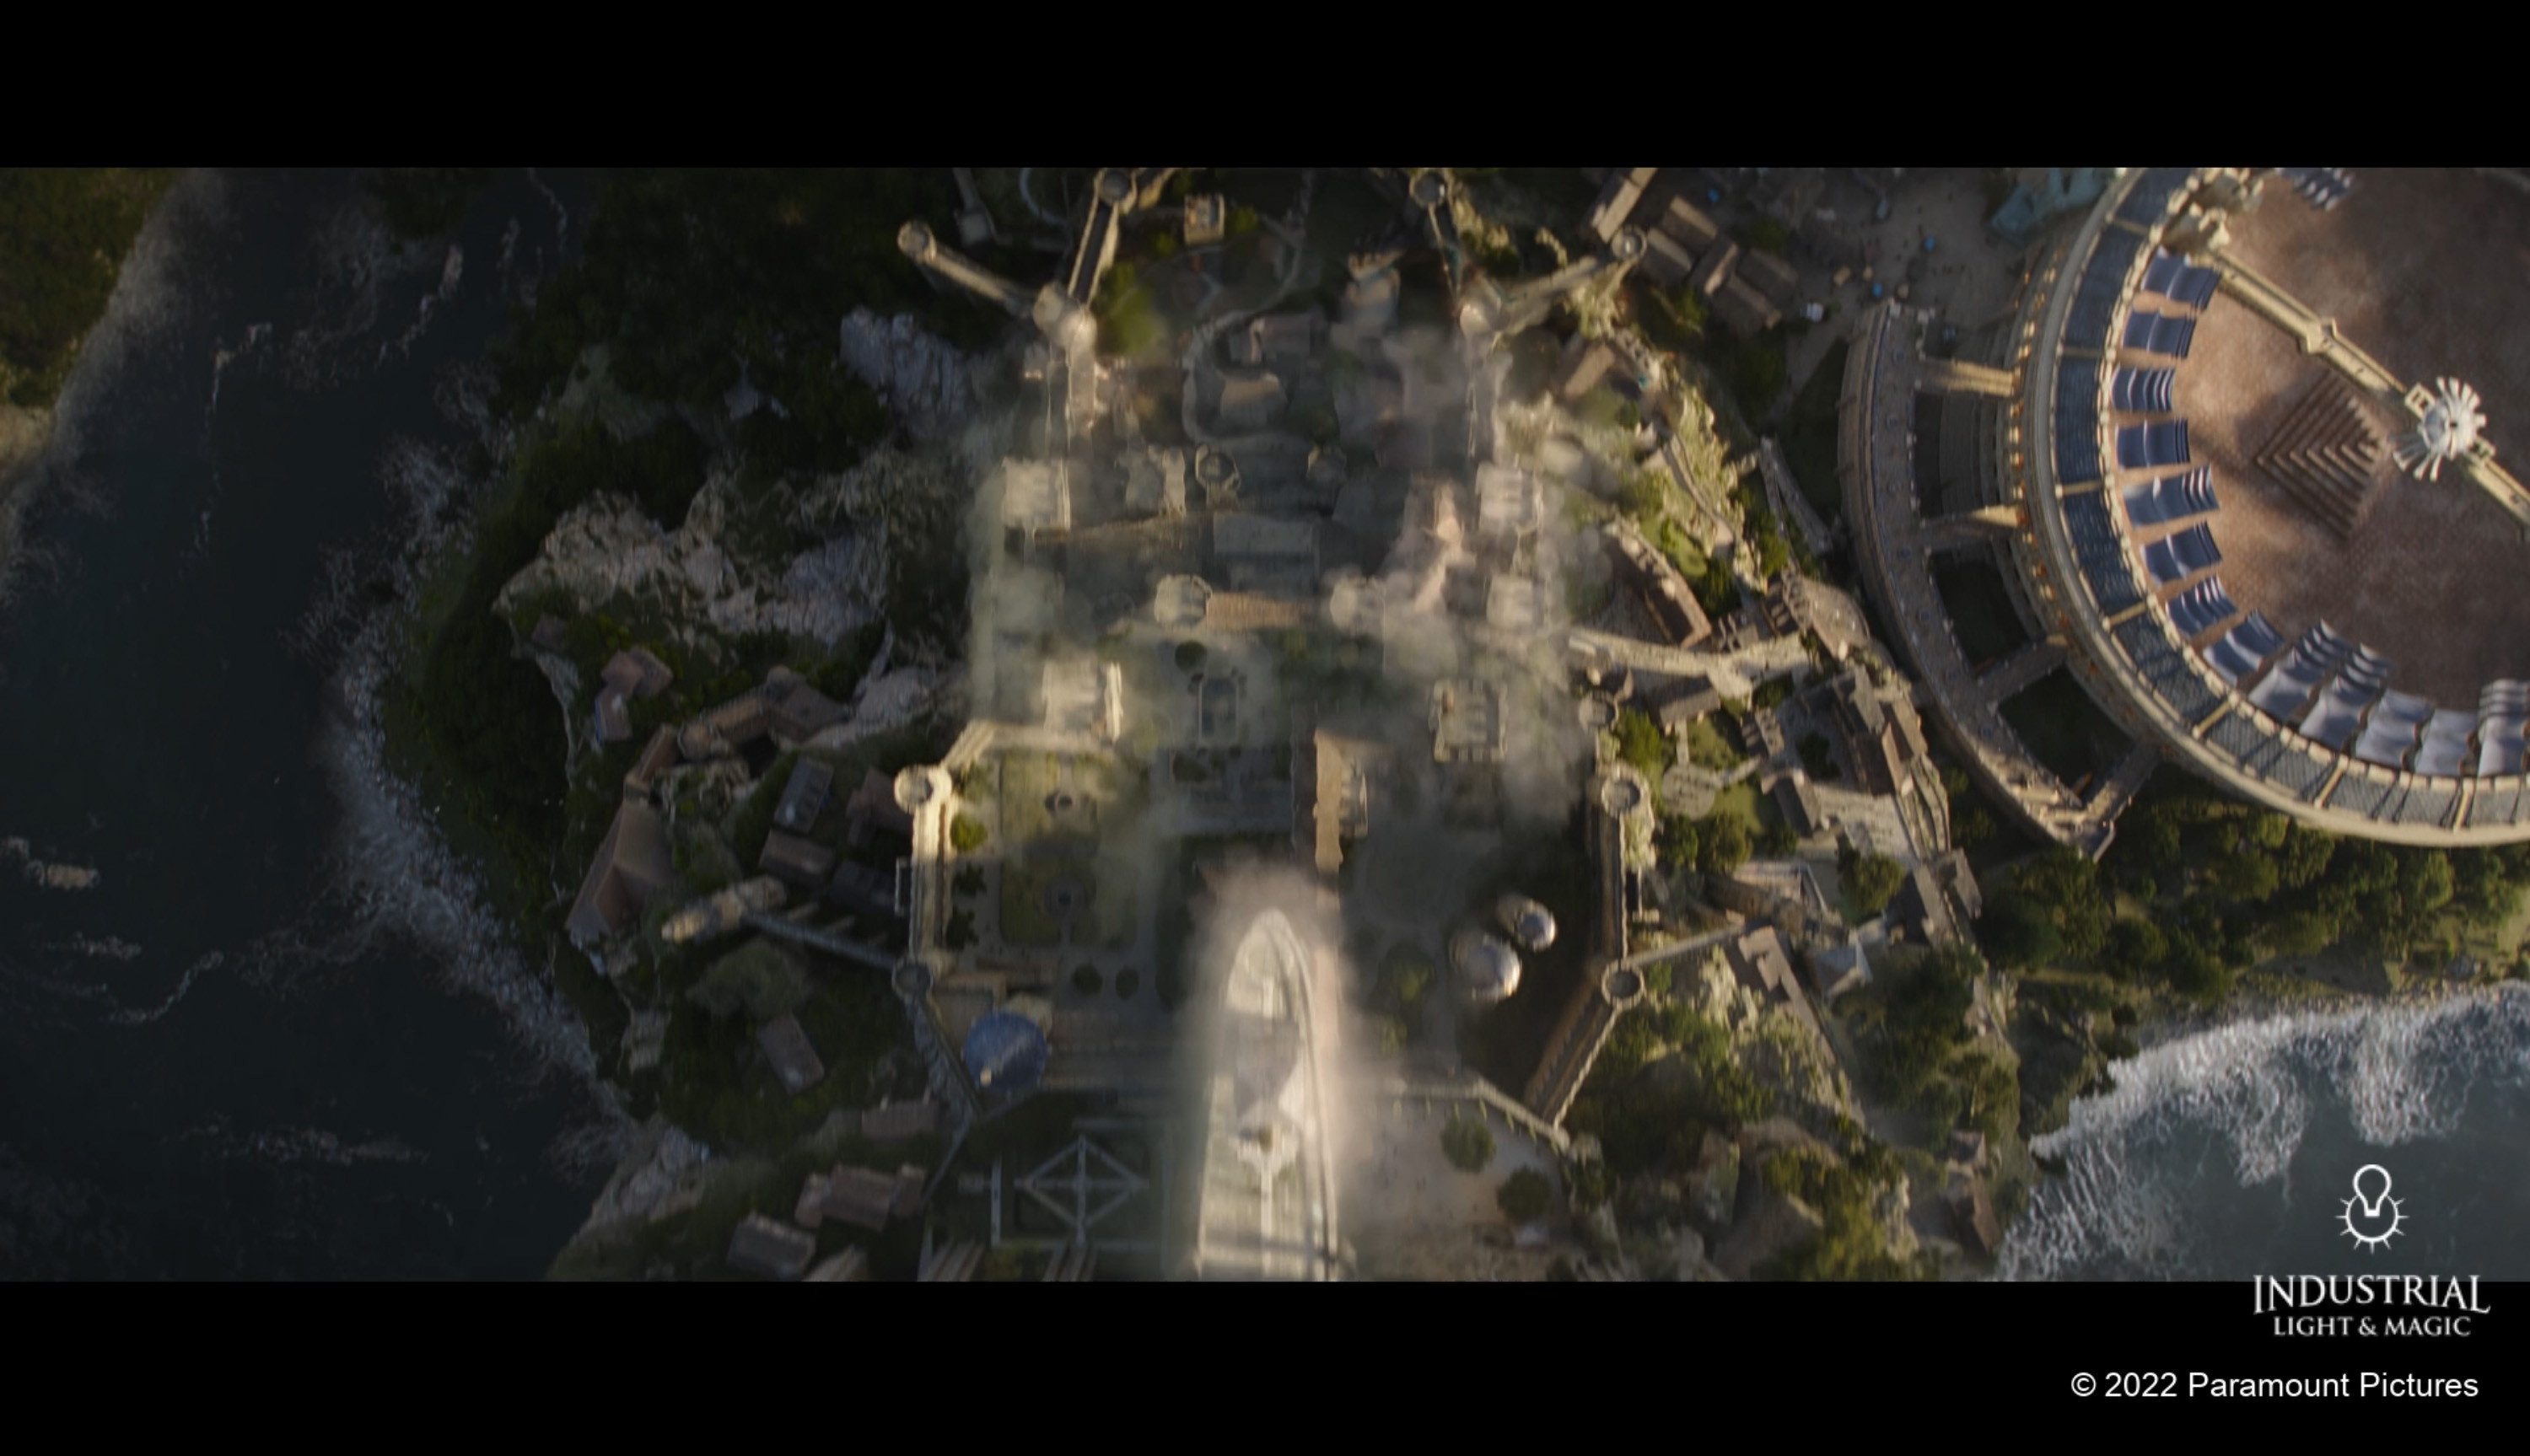 layout, design, texturing and vegetation of the slopes section around the castle ( western side/in sun - as seen here ) , modeling and texturing of the front castle courtyard